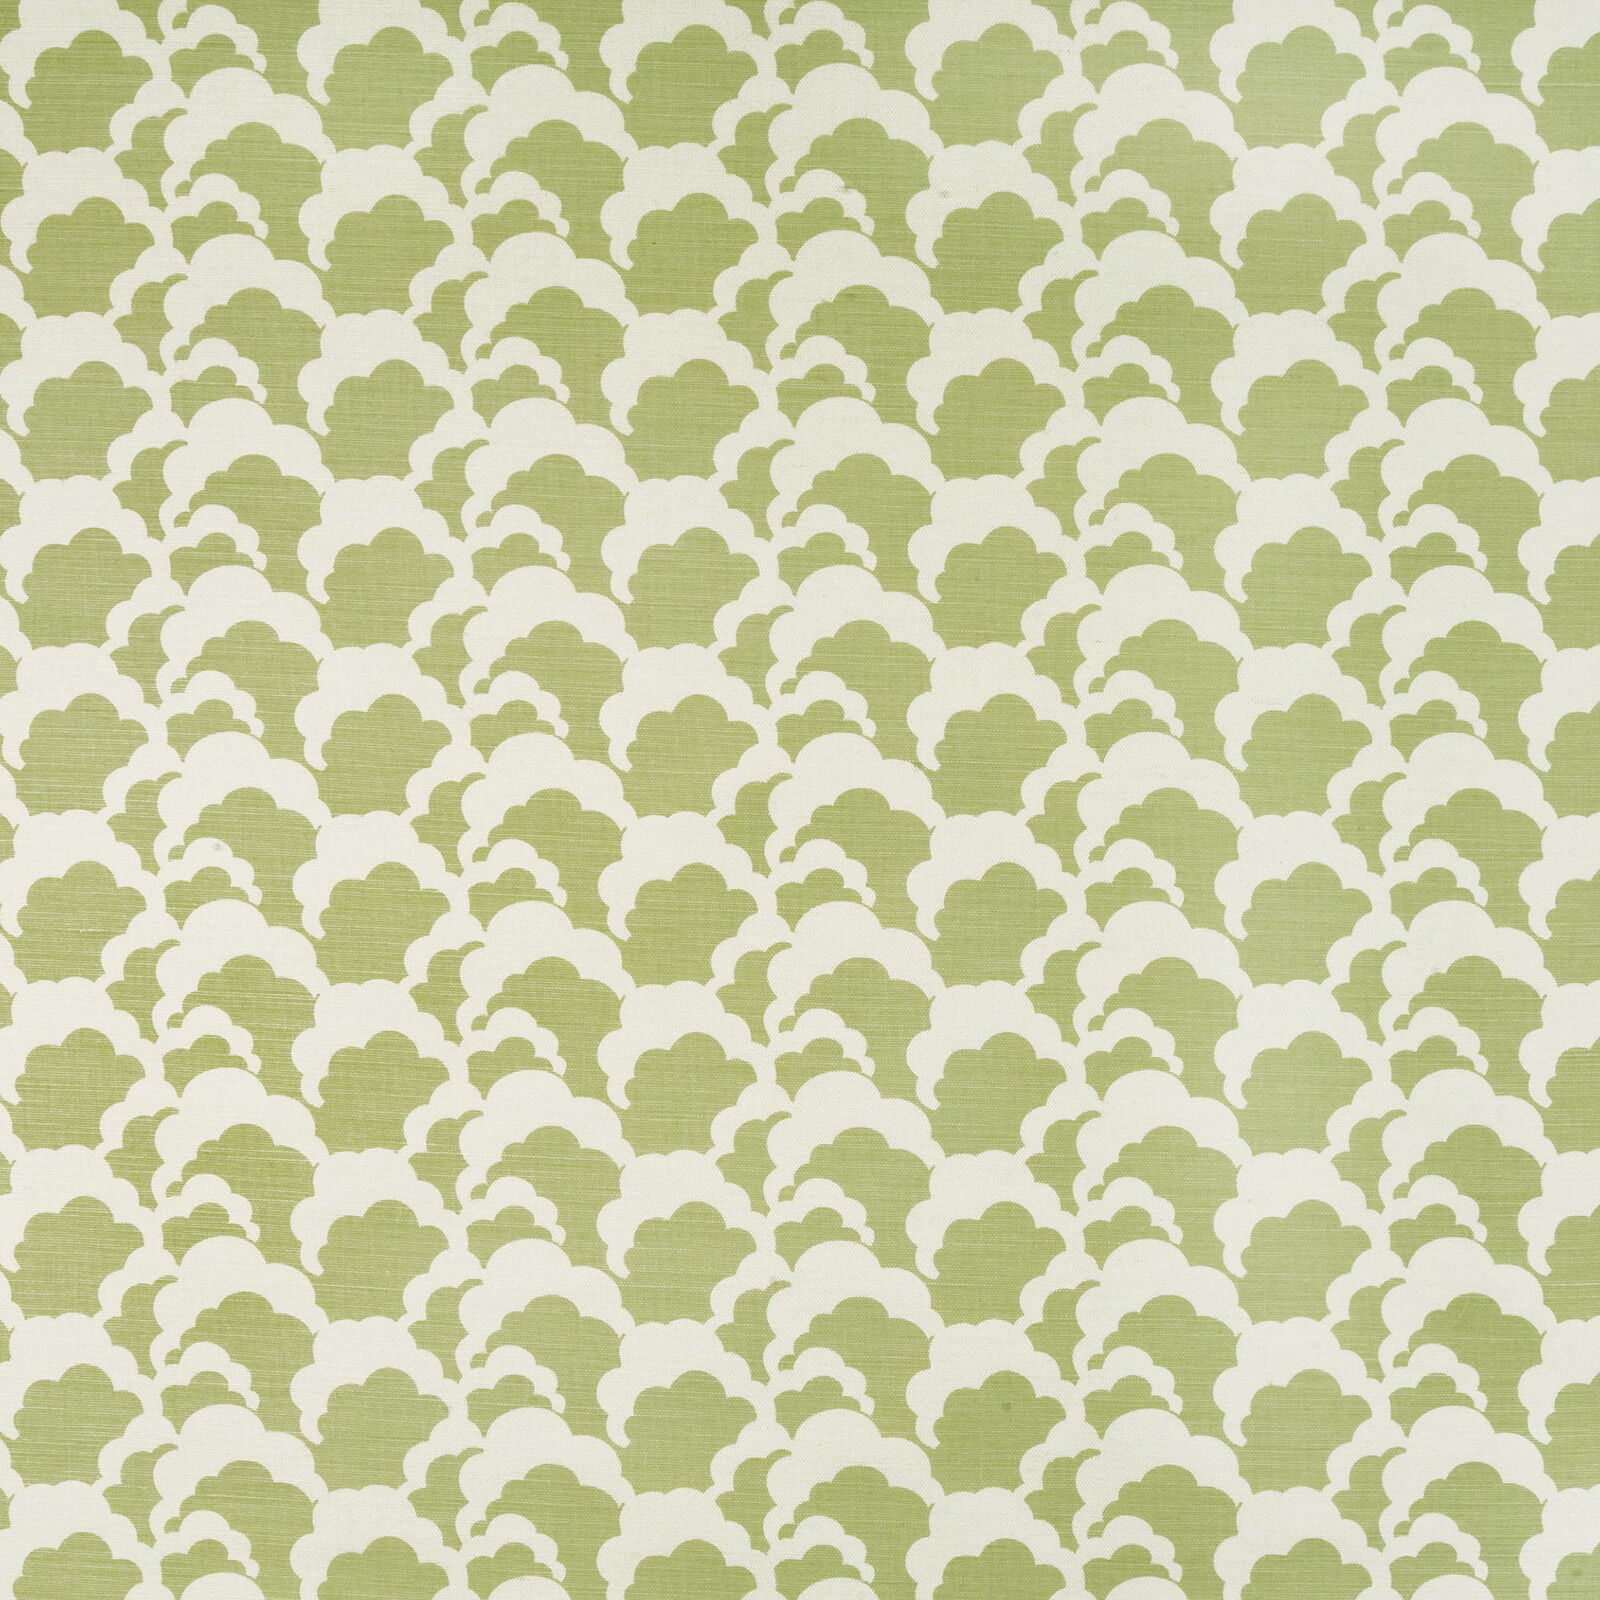 Rapture & Wright Linen Print Drapery Upholstery Fabric- Clouds / Green 10 yds